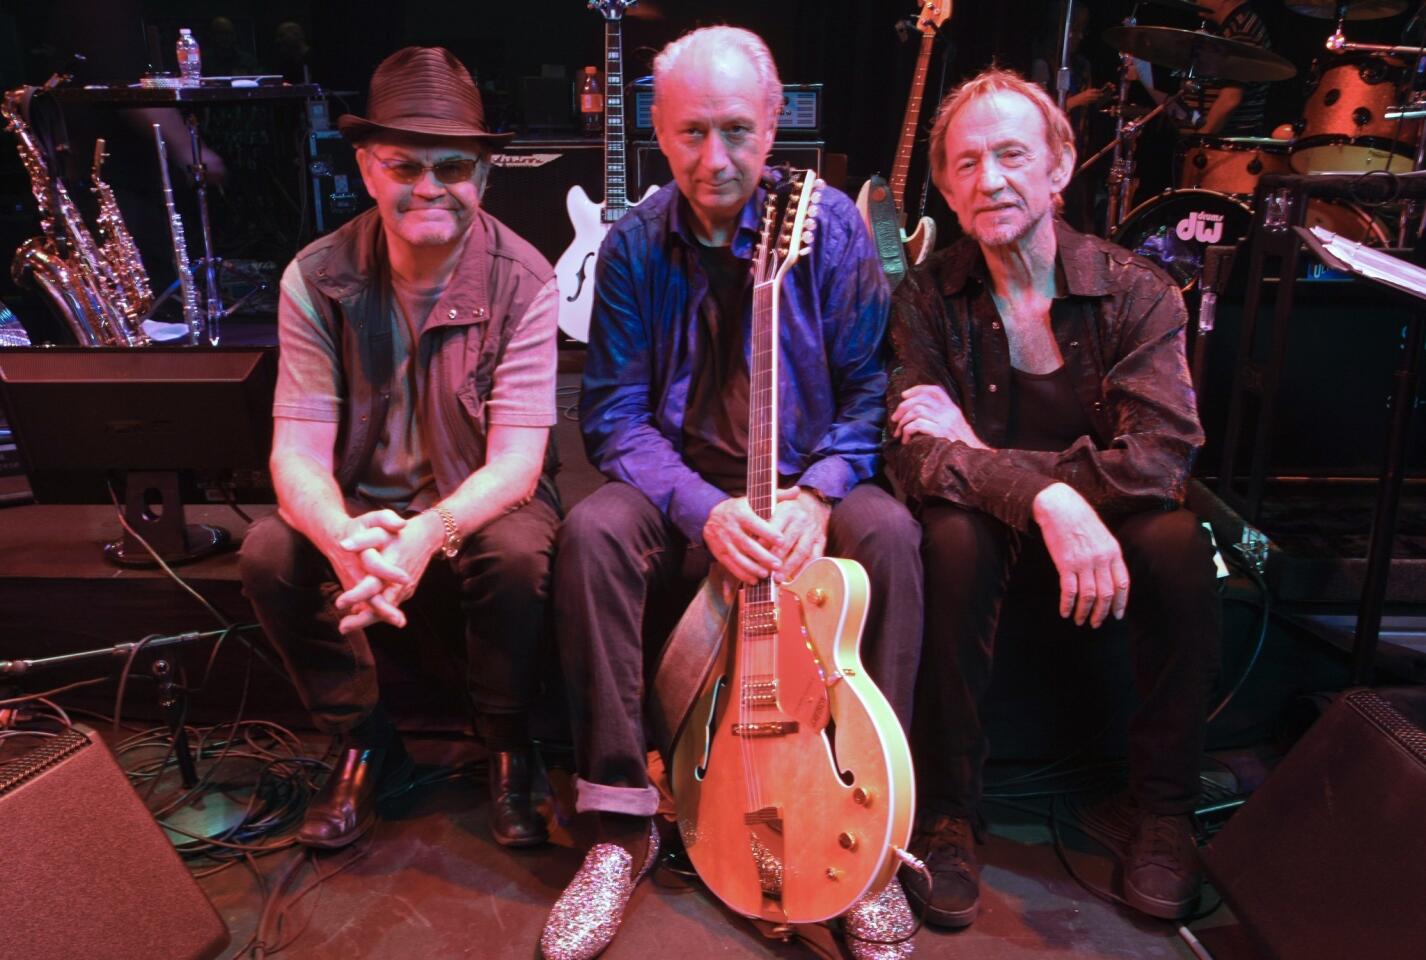 Micky Dolenz, Mike Nesmith and Peter Tork after a rehearsal concert kicking off their 2012 reunion tour.